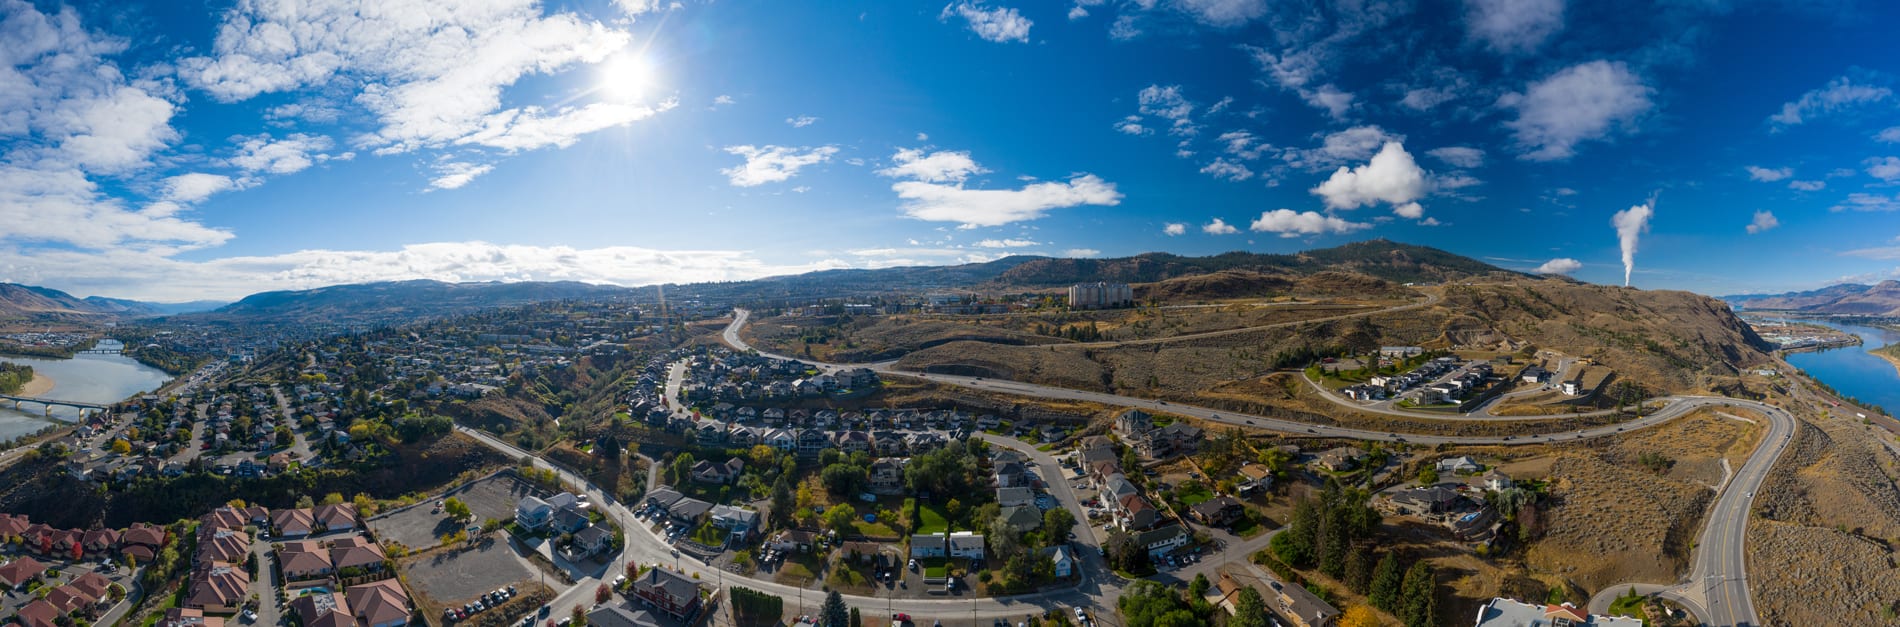 Kamloops City Aerial bright sky with clouds and winding roads with city